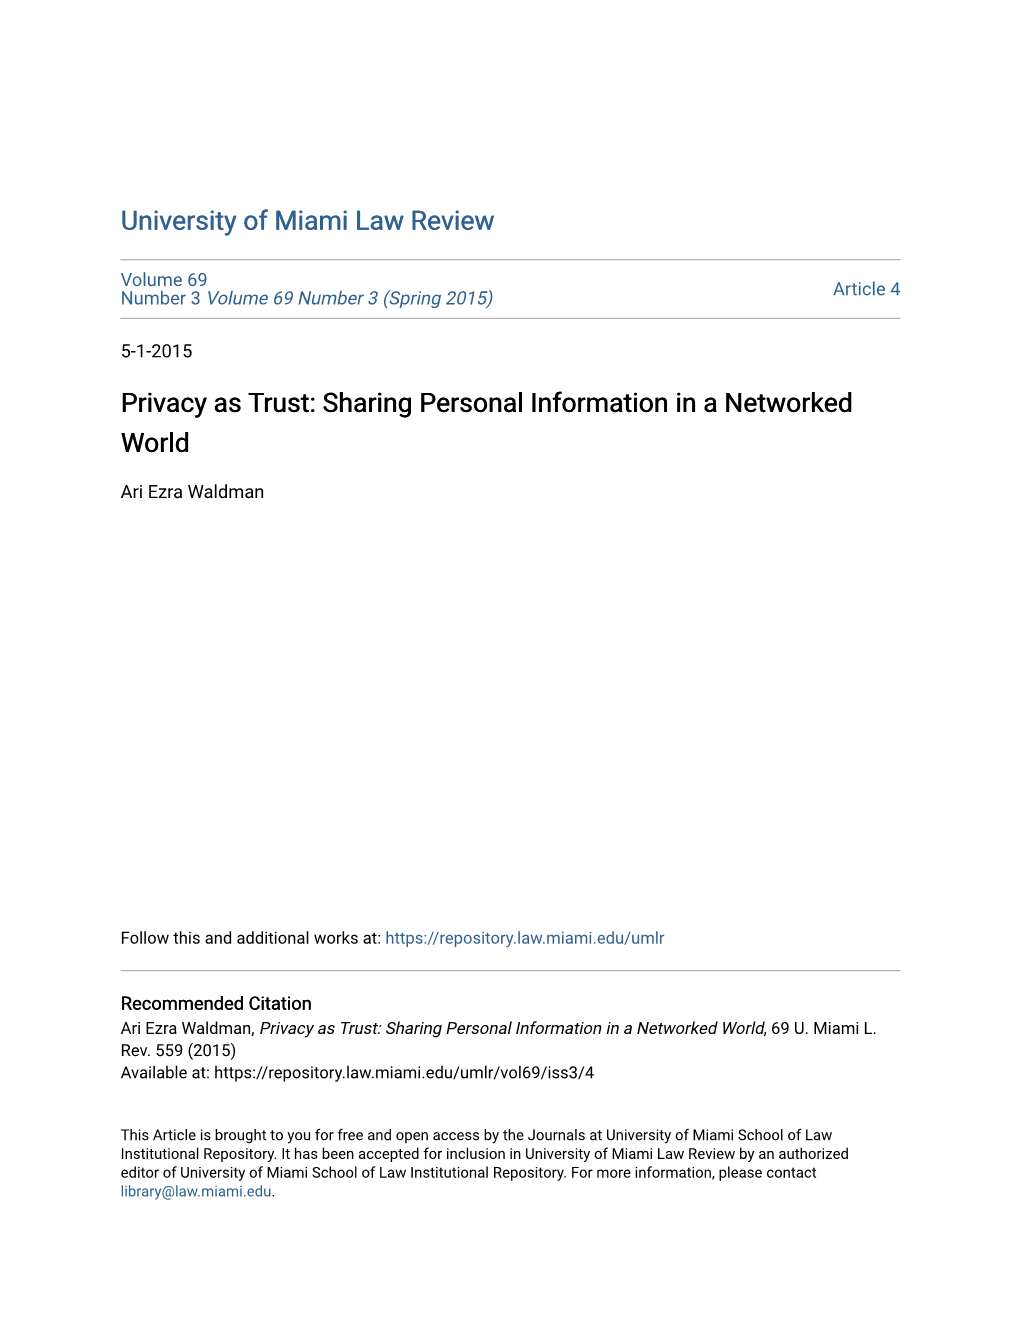 Privacy As Trust: Sharing Personal Information in a Networked World